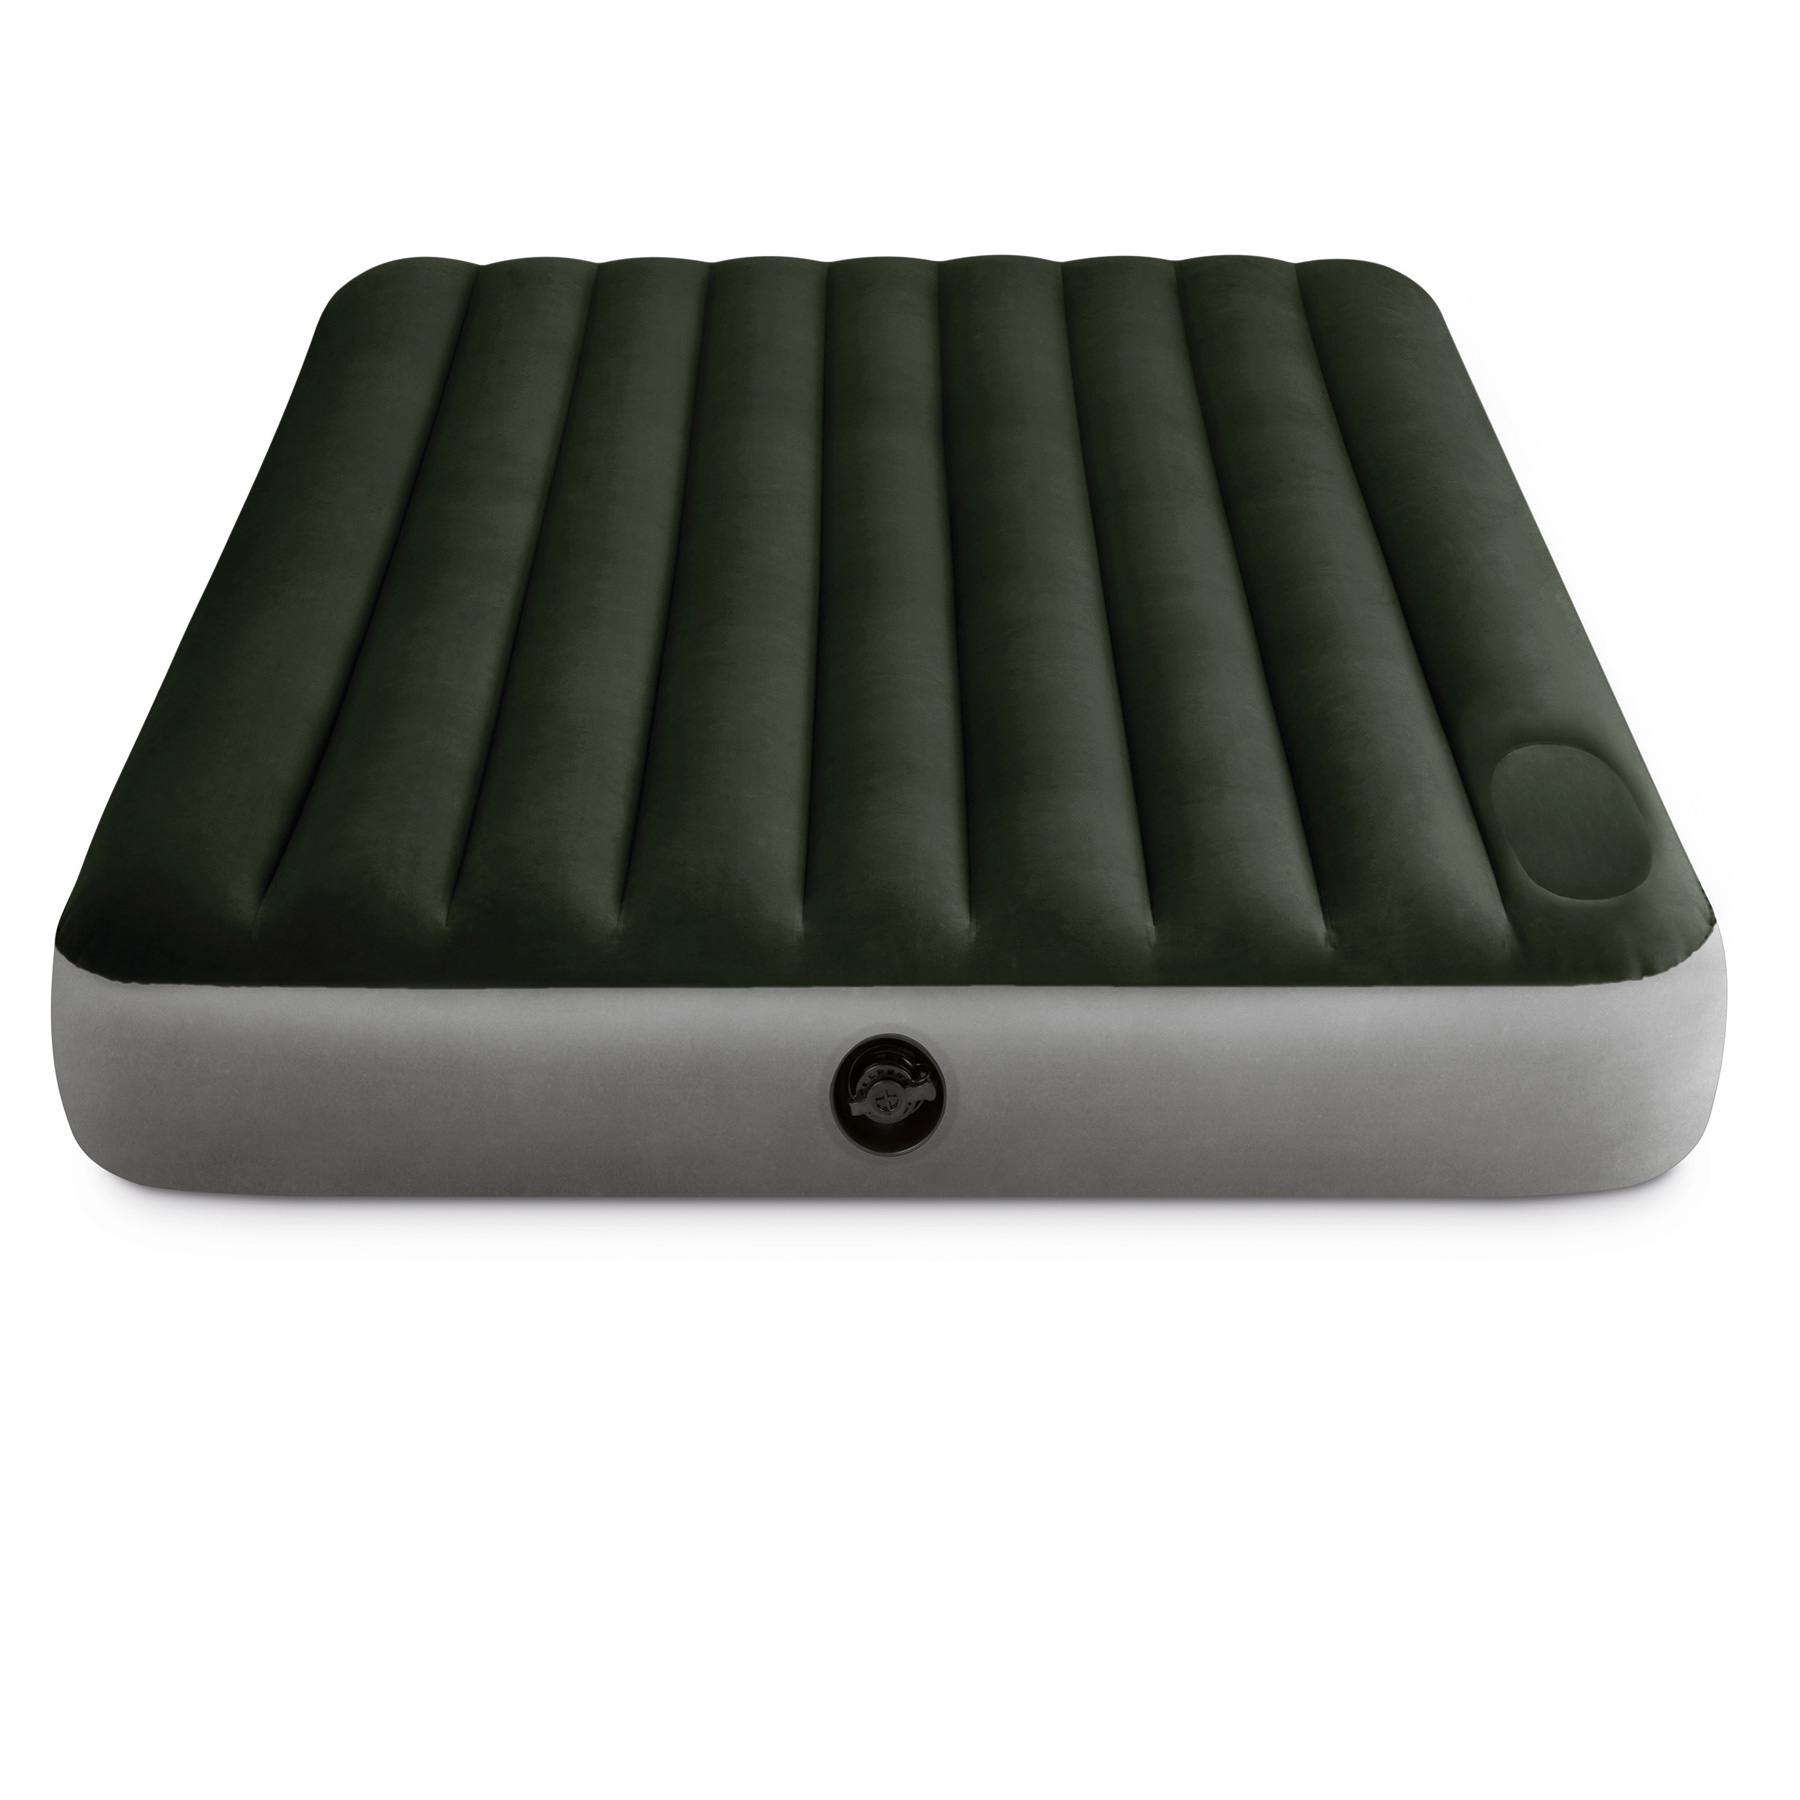 DOWNY AIRBED Queen w/pump